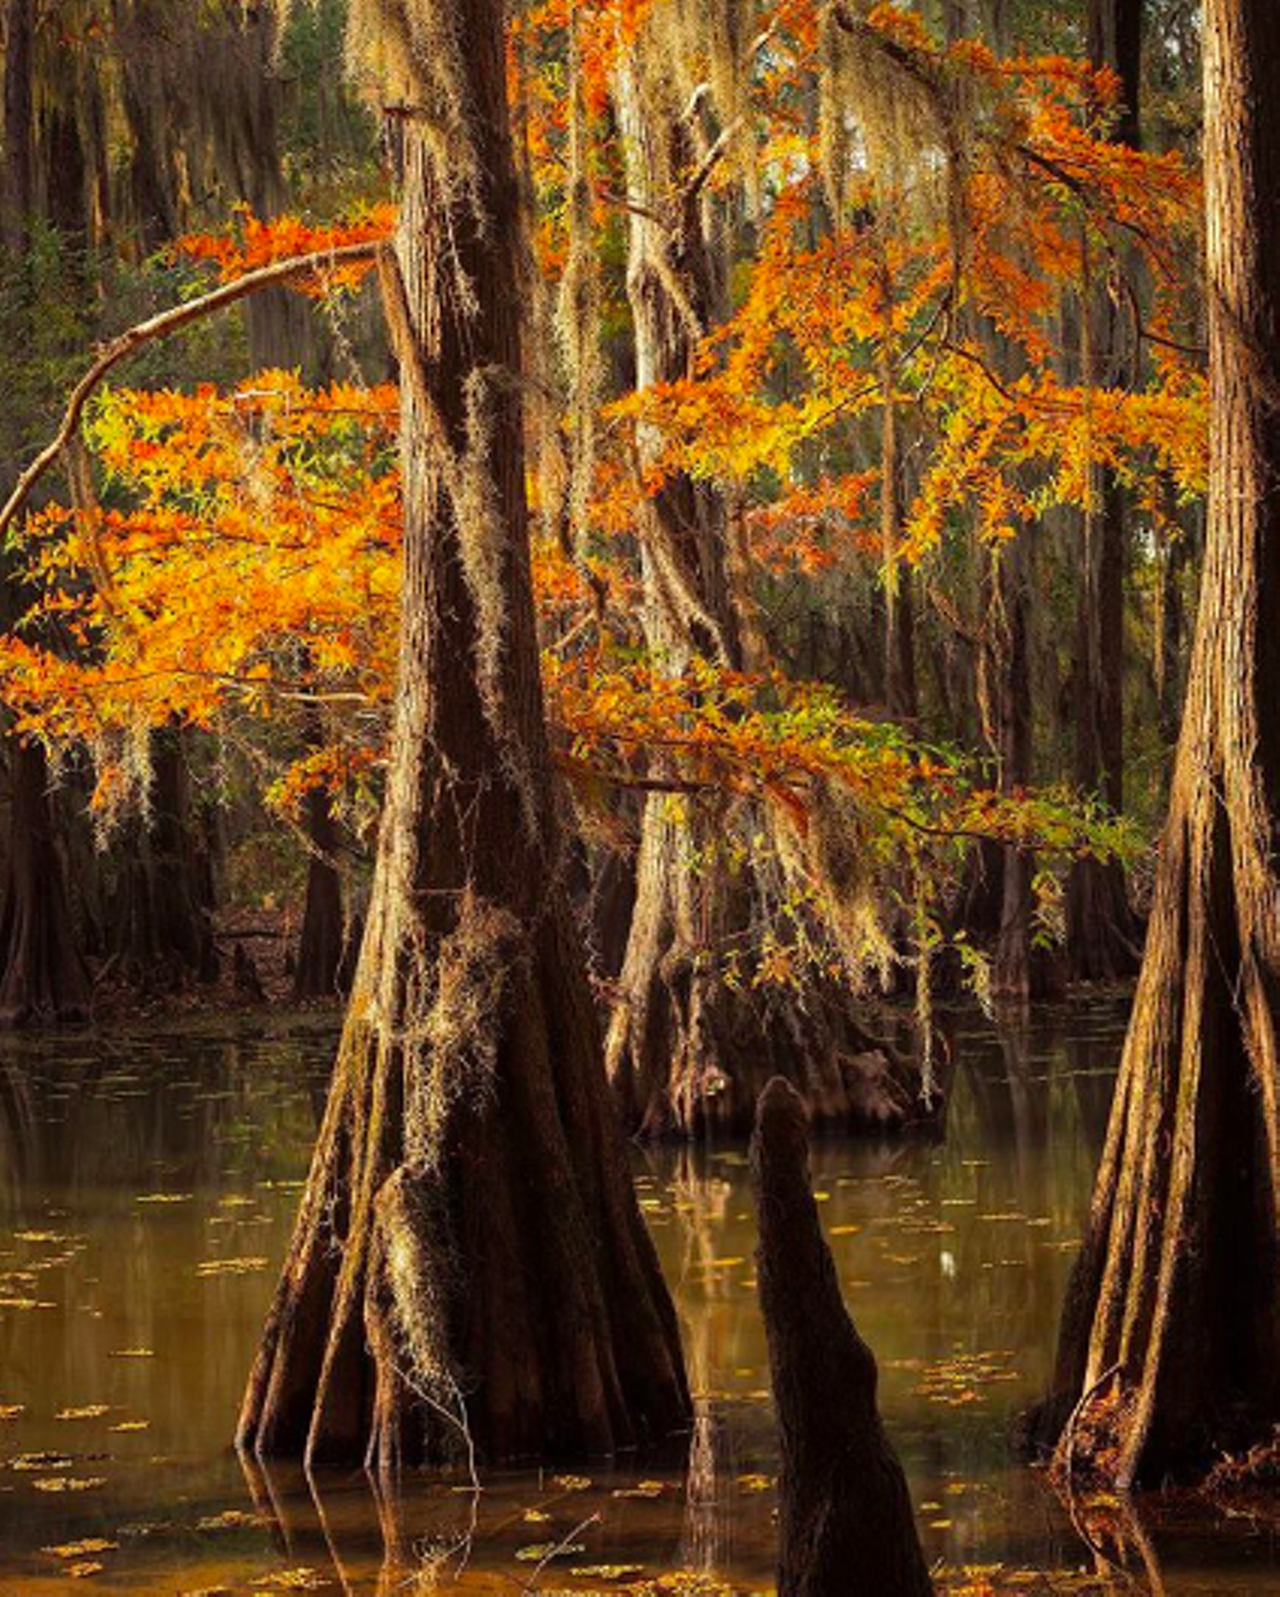 Caddo Lake State Park
245 Park Rd 2, Karnack, (903) 679-3351, tpwd.texas.gov
Located in Eastern Texas, Caddo Lake is all about wildlife and the natural lake. Camp, fish, paddle, hike and go boating here – whatever you may wish. All activities aside, the serene beauty of this park is reason enough to make it out here.
Photo via Instagram / jfenske